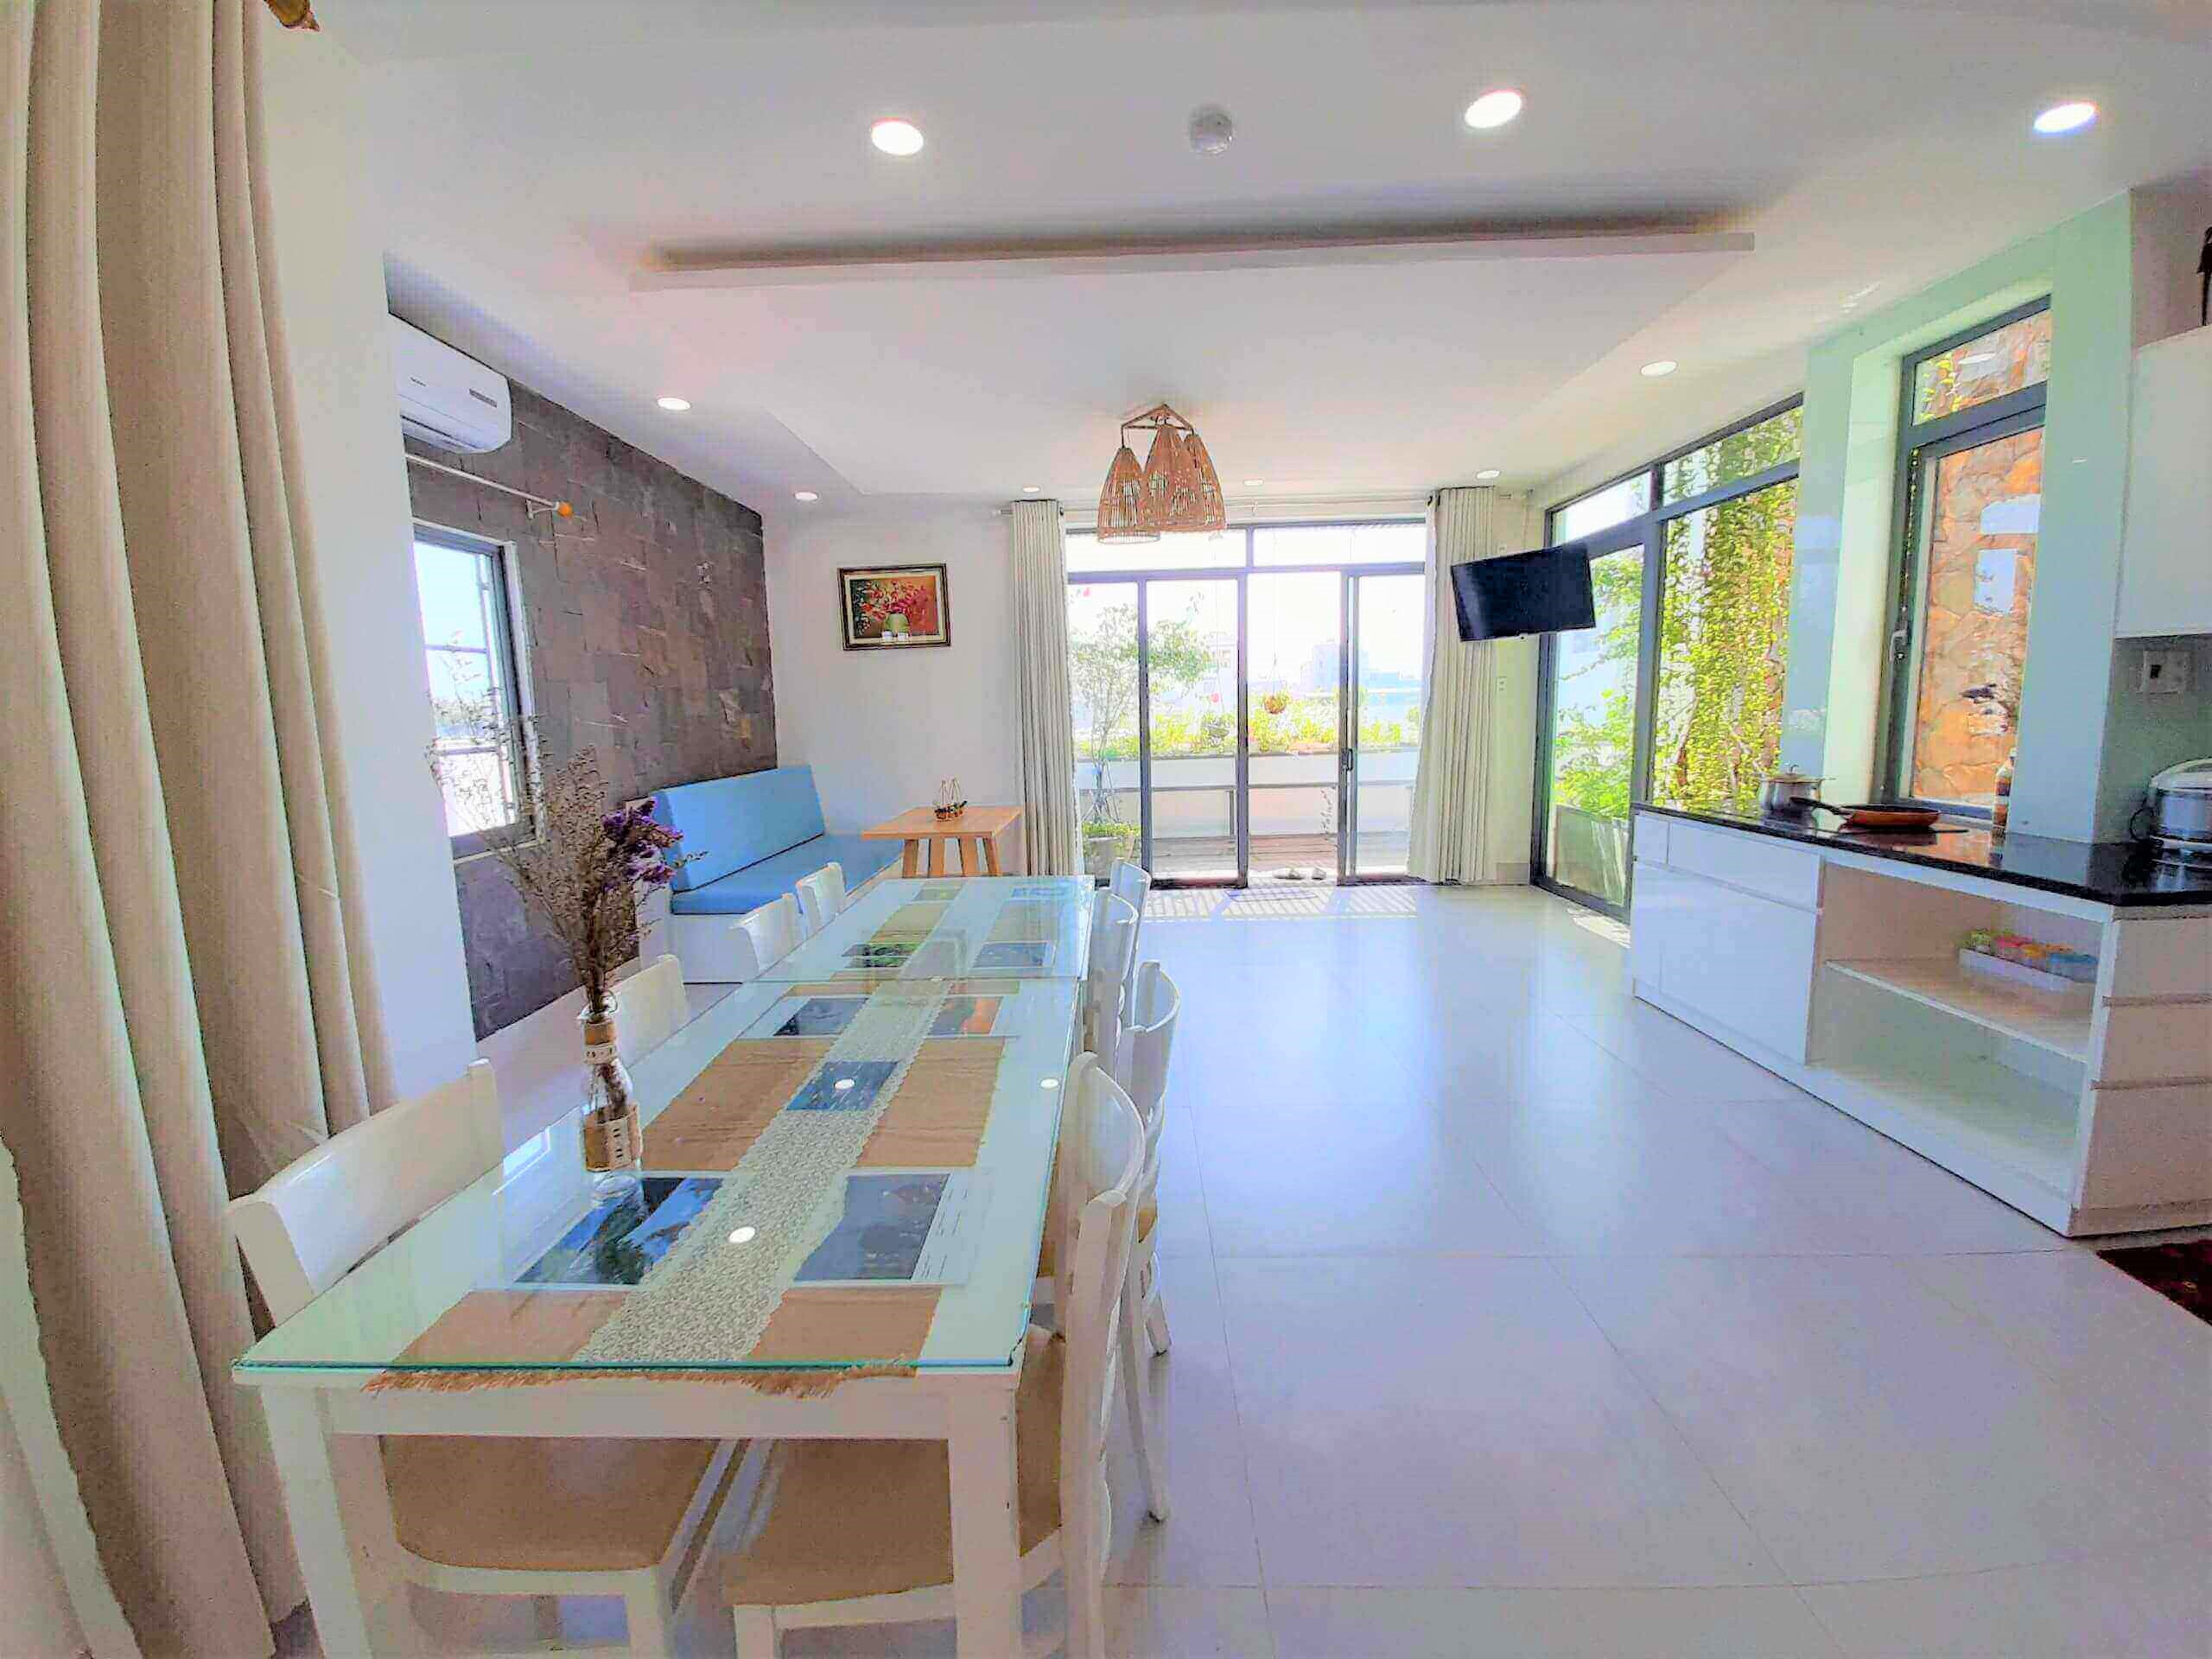 3 Bedrooms Apartment For Rent In An Thuong Ngu Hanh Son